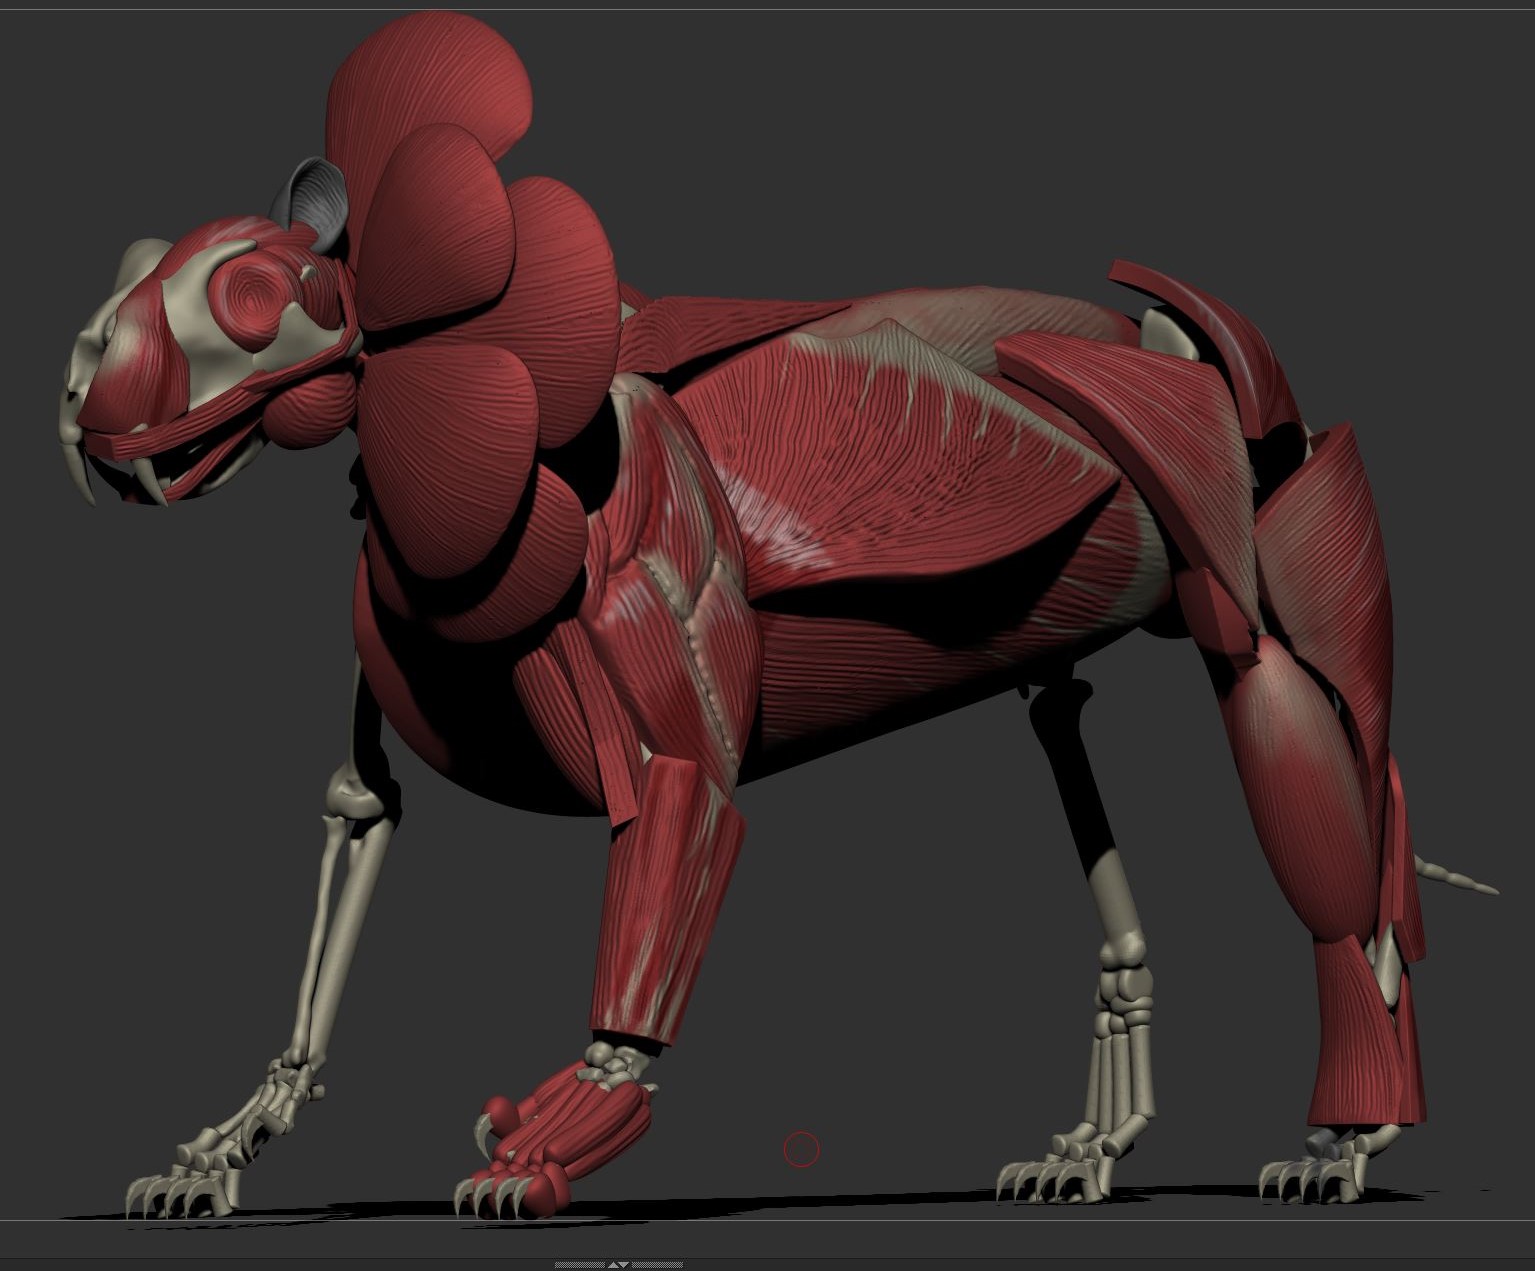 An anatomical 3D render of a creature I designed based off a fusion of a Smilodon and a Crocodile.